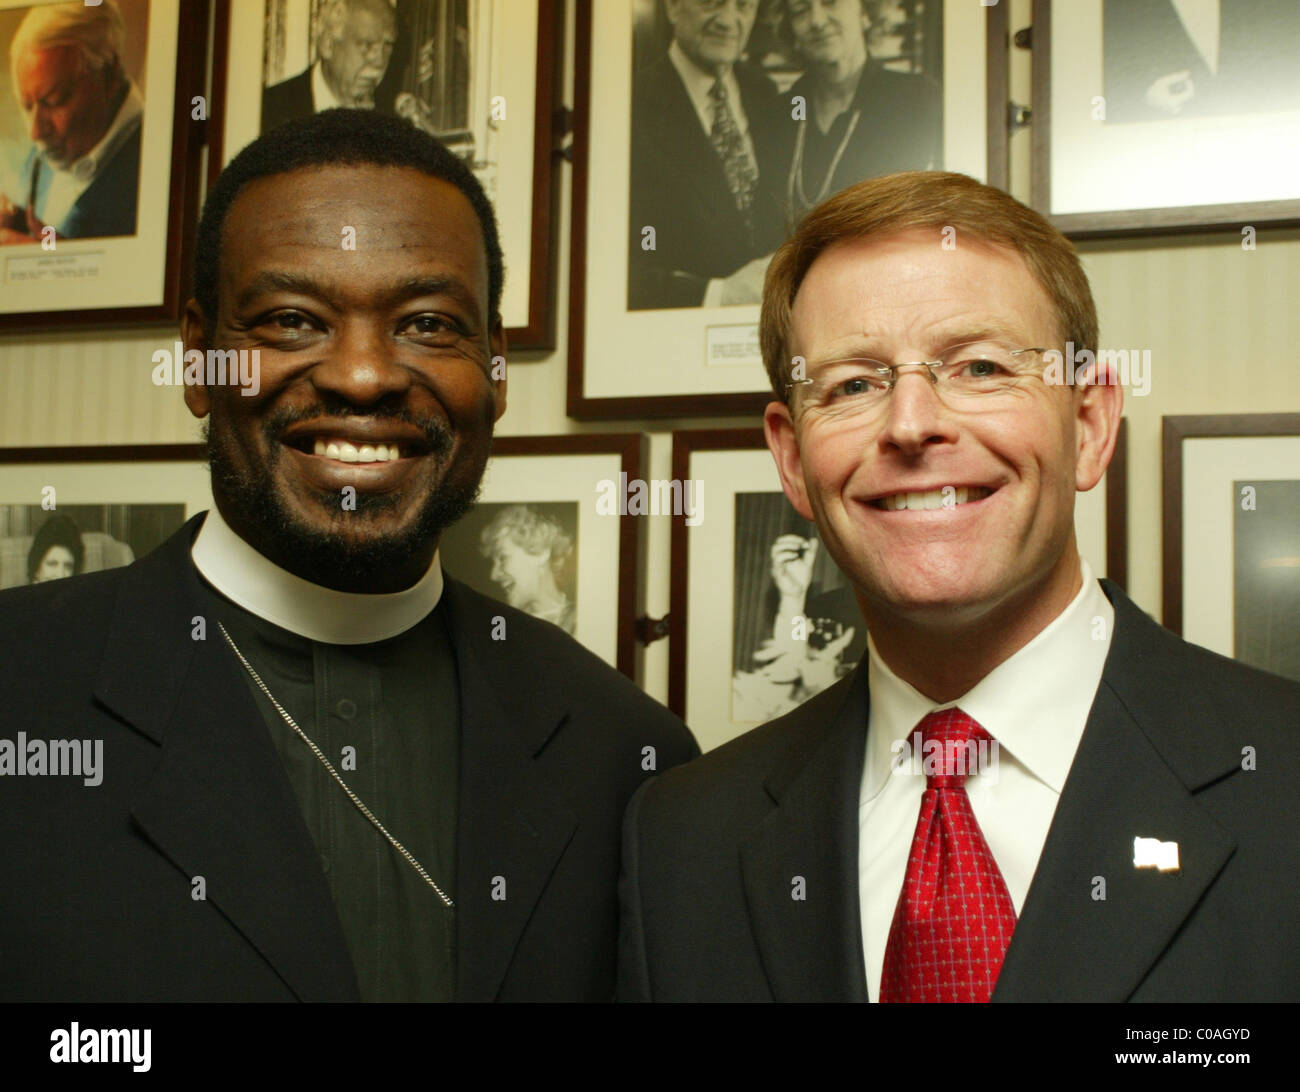 Bishop Harry Jackson, Tony Perkins 'Has the Religious Right Lost Its Way?' Book launch and News Conference held at the National Stock Photo